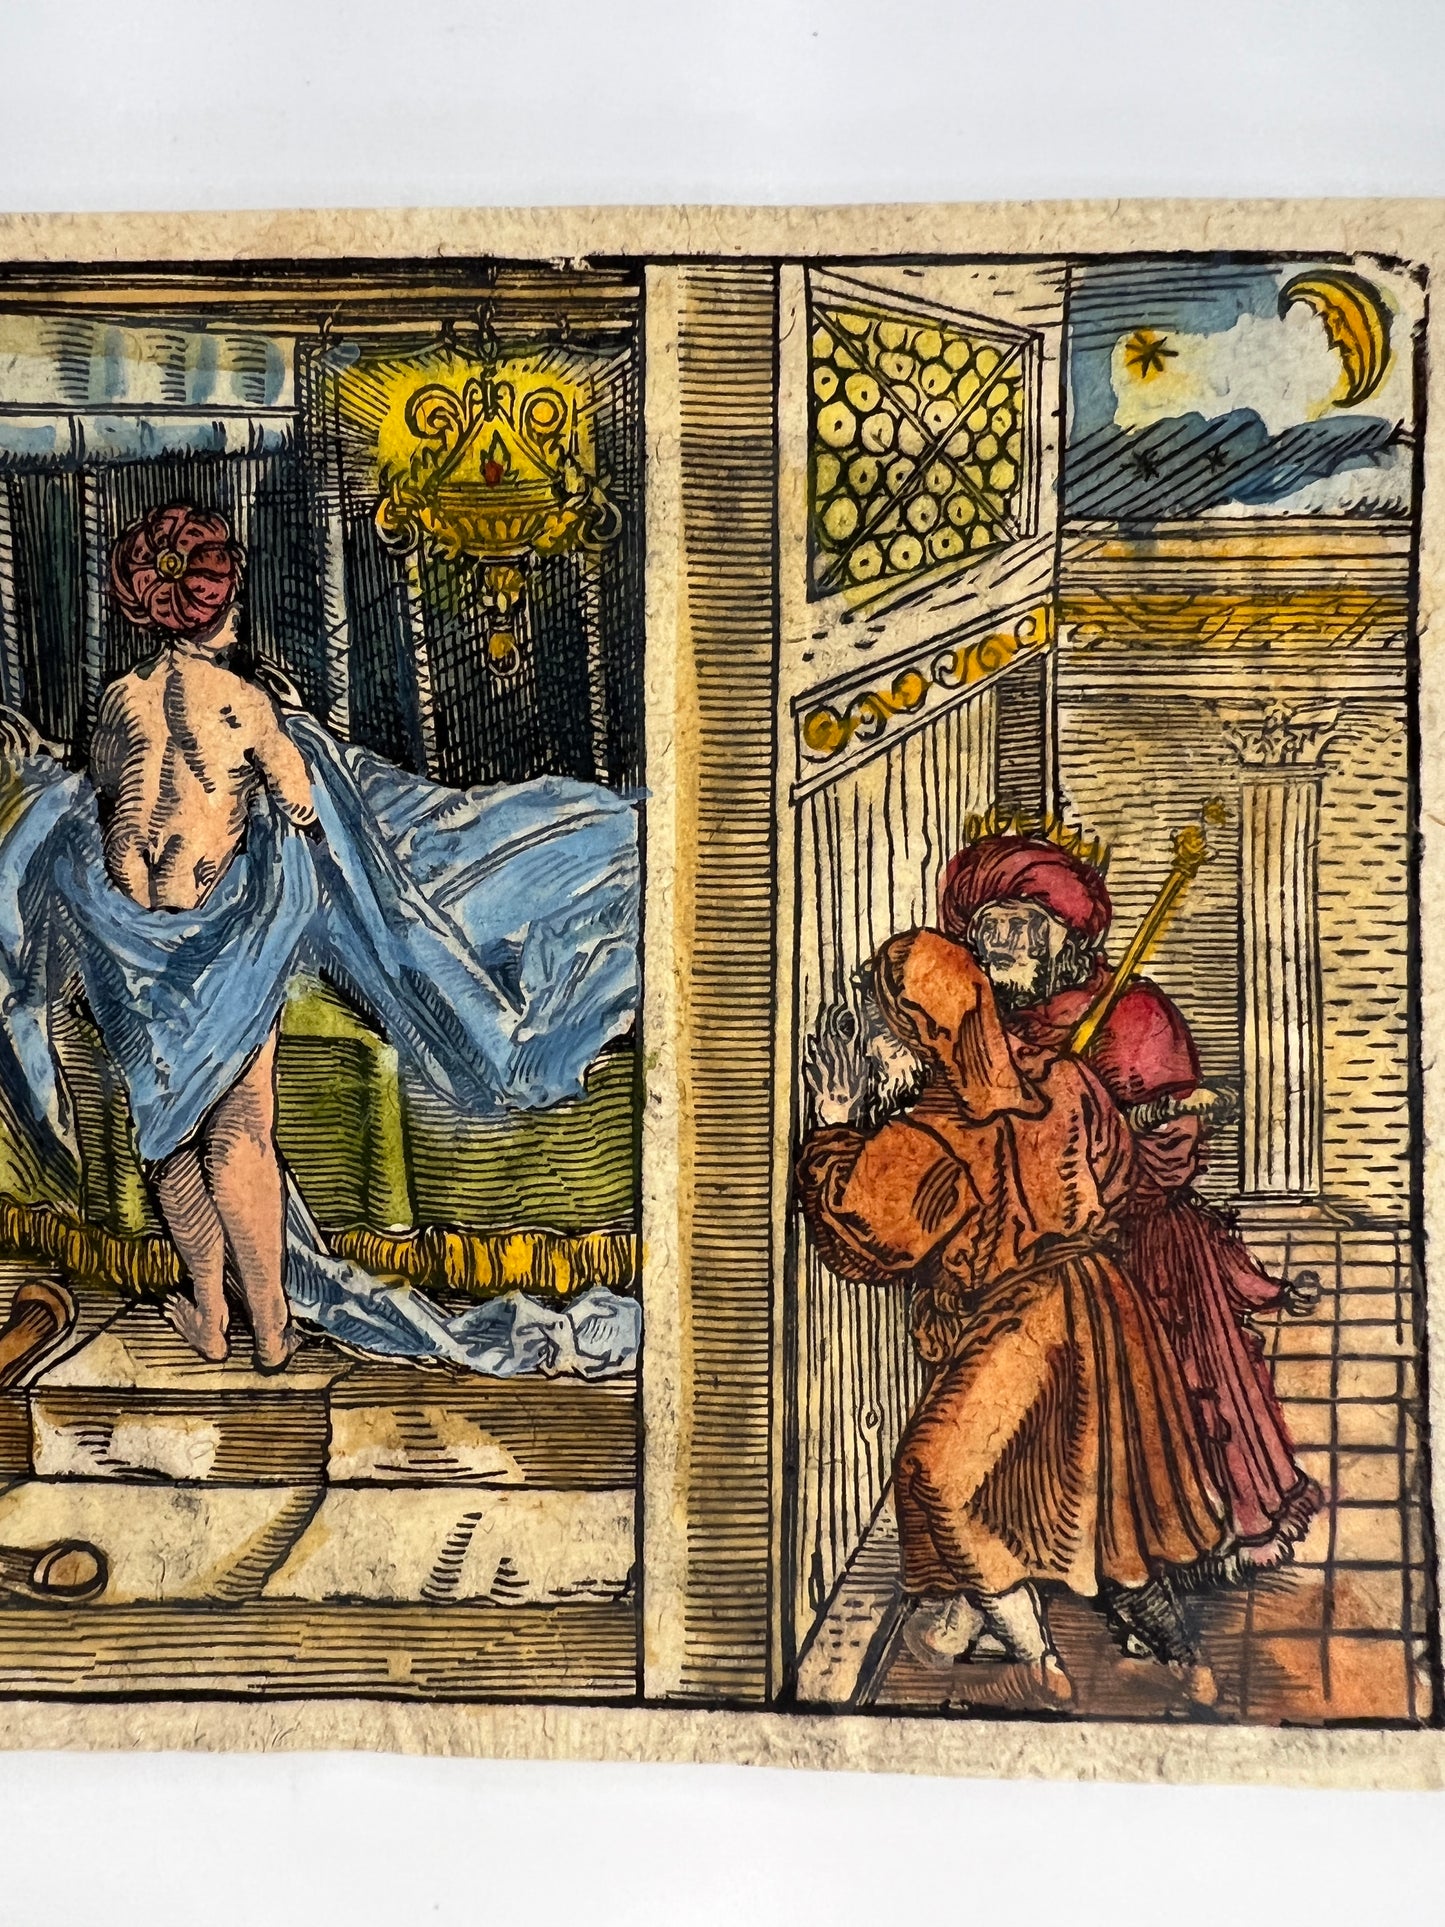 c1560 Woodcut by Hans Weiditz - Medieval Life: Adultery and Peeping Toms